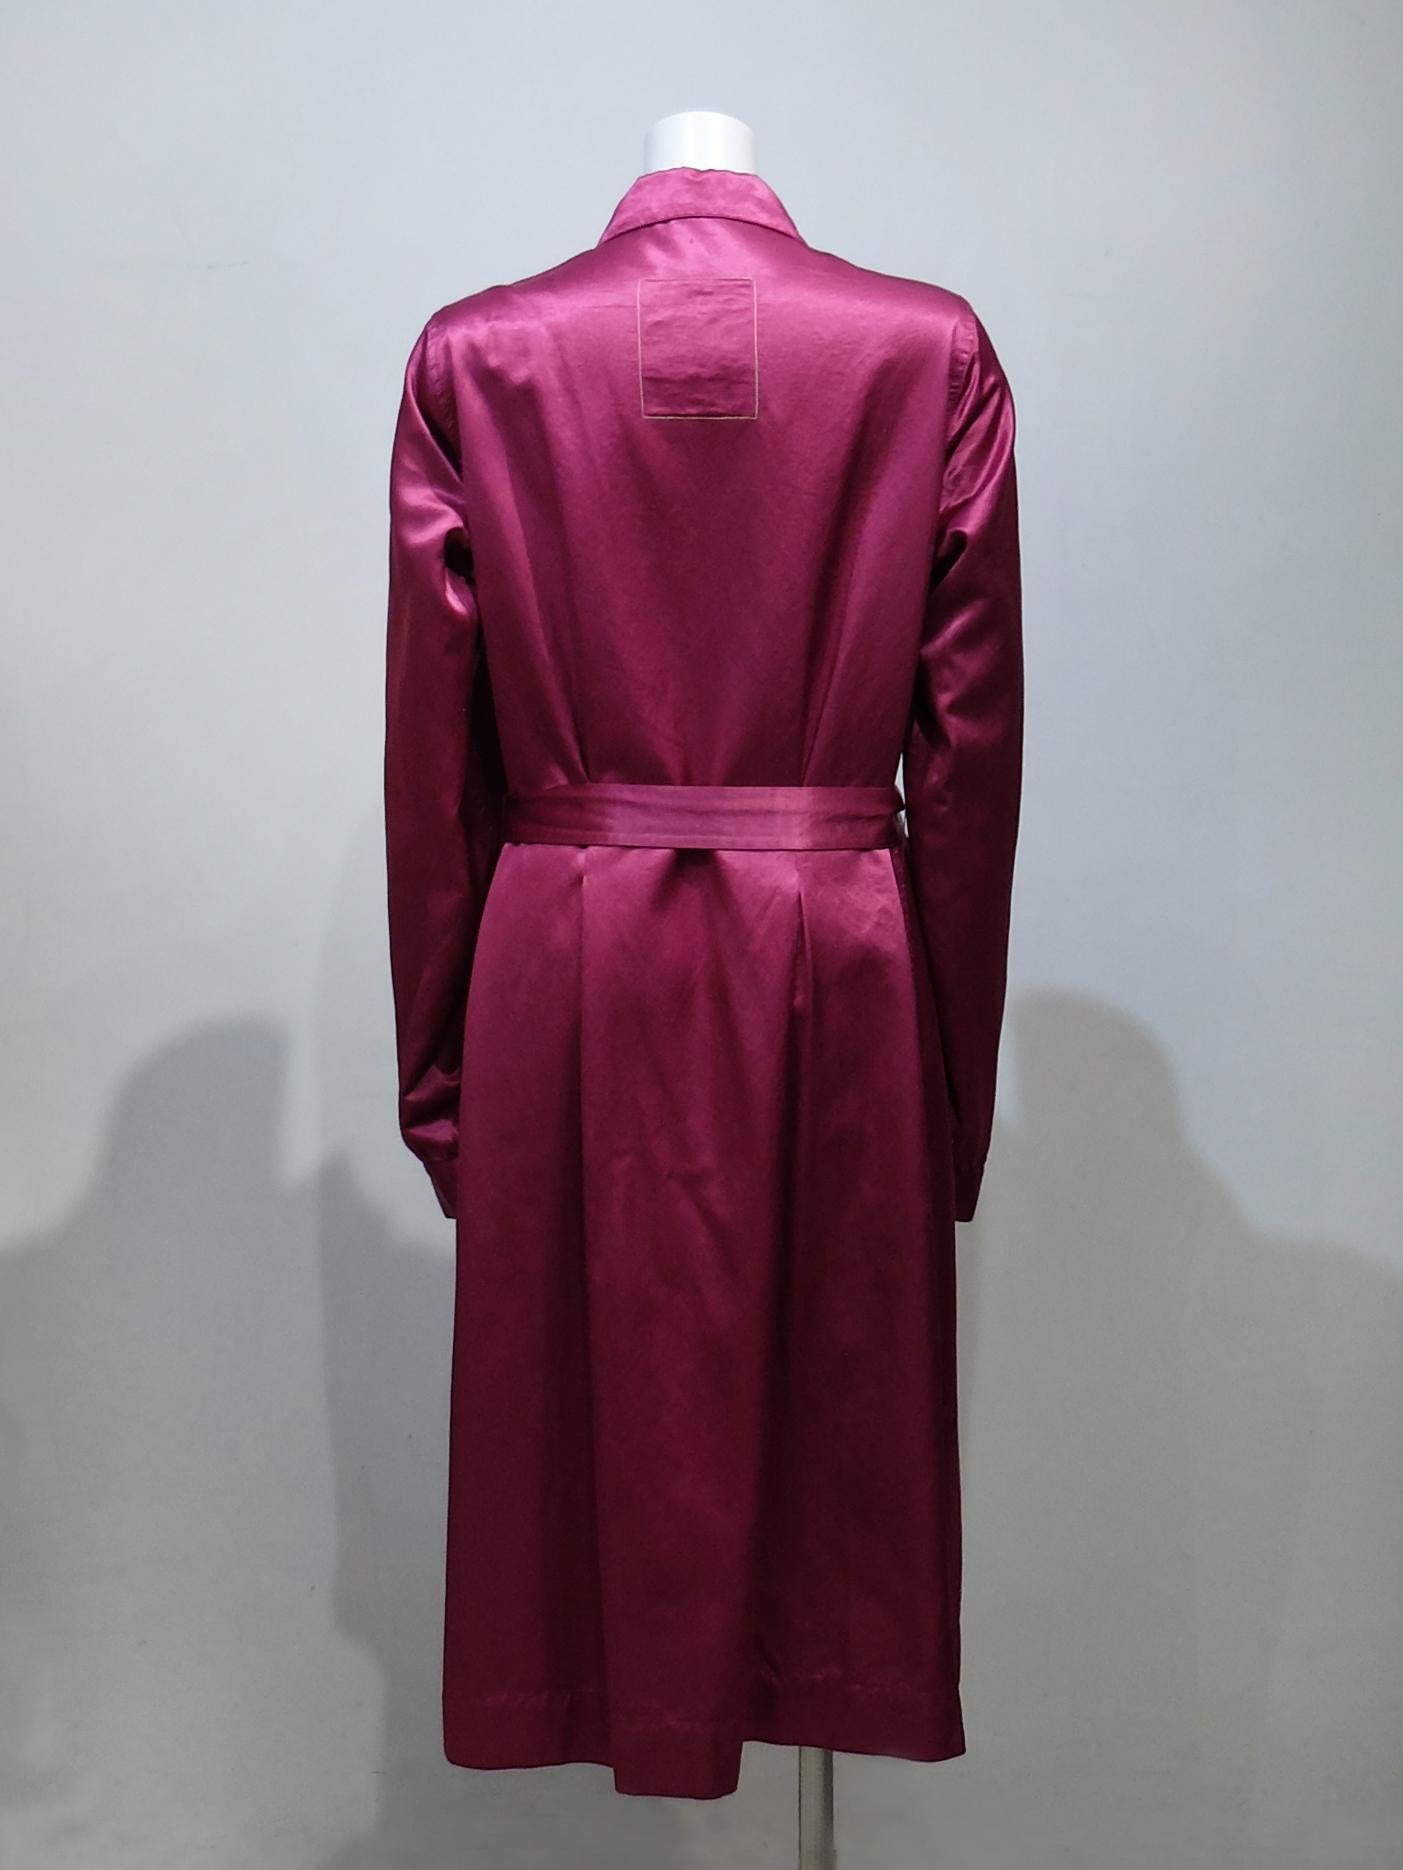 Maison Martin Margiela Reproduction Pink Coat In Excellent Condition In Shibuya-Ku, 13